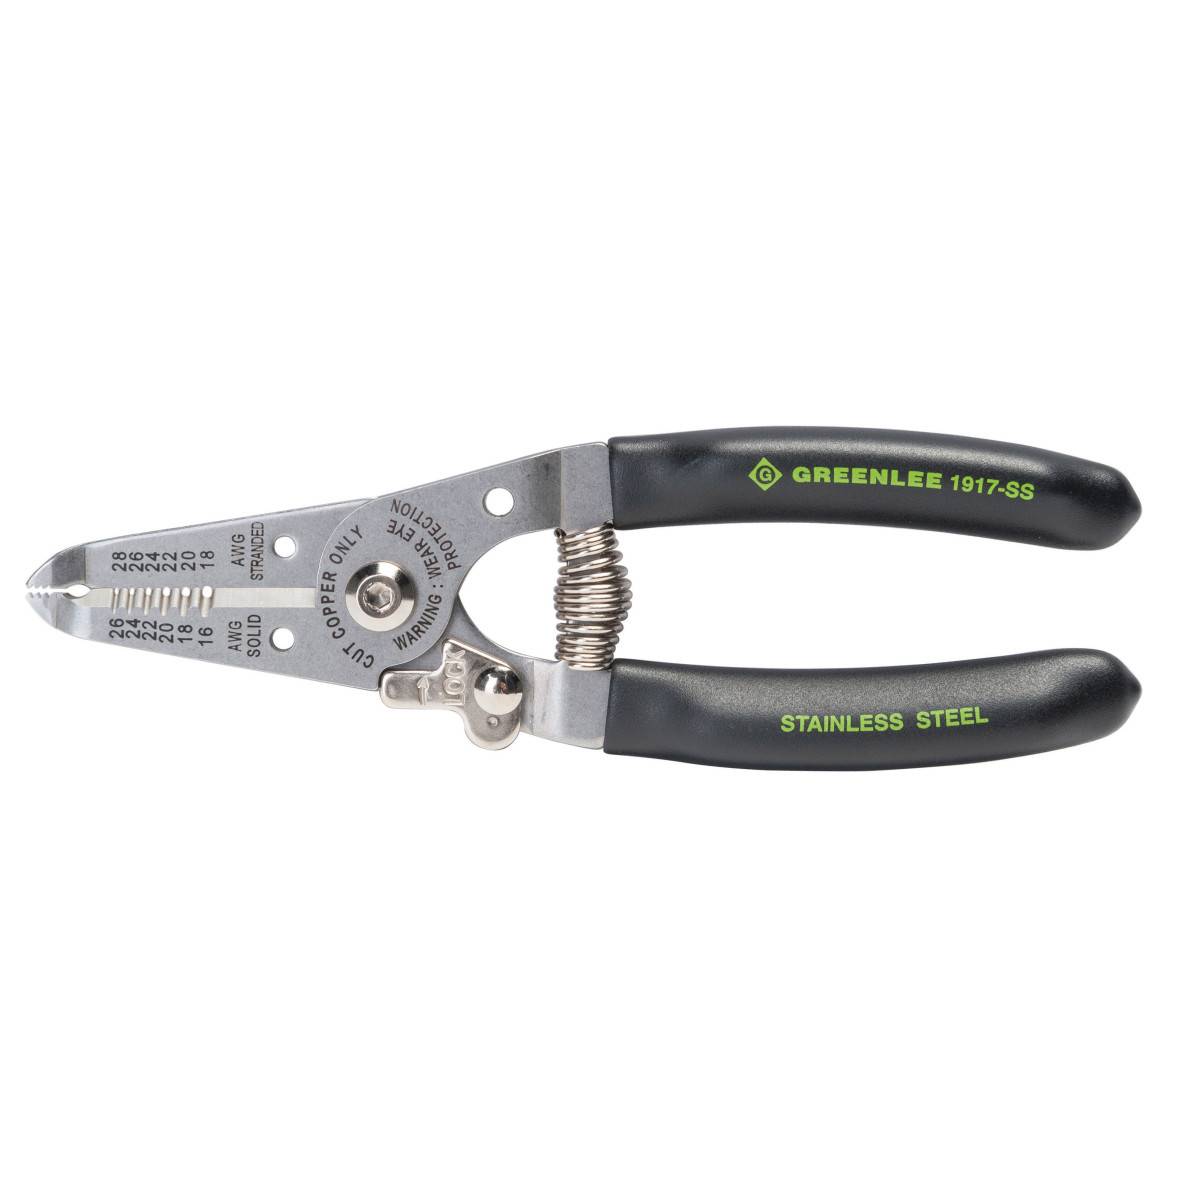 Greenlee® 1917-SS Manual Fixed Hole Wire Stripper With Spring and Lock, 26 to 16 AWG Solid, 28 to 18 AWG Stranded Cable/Wire